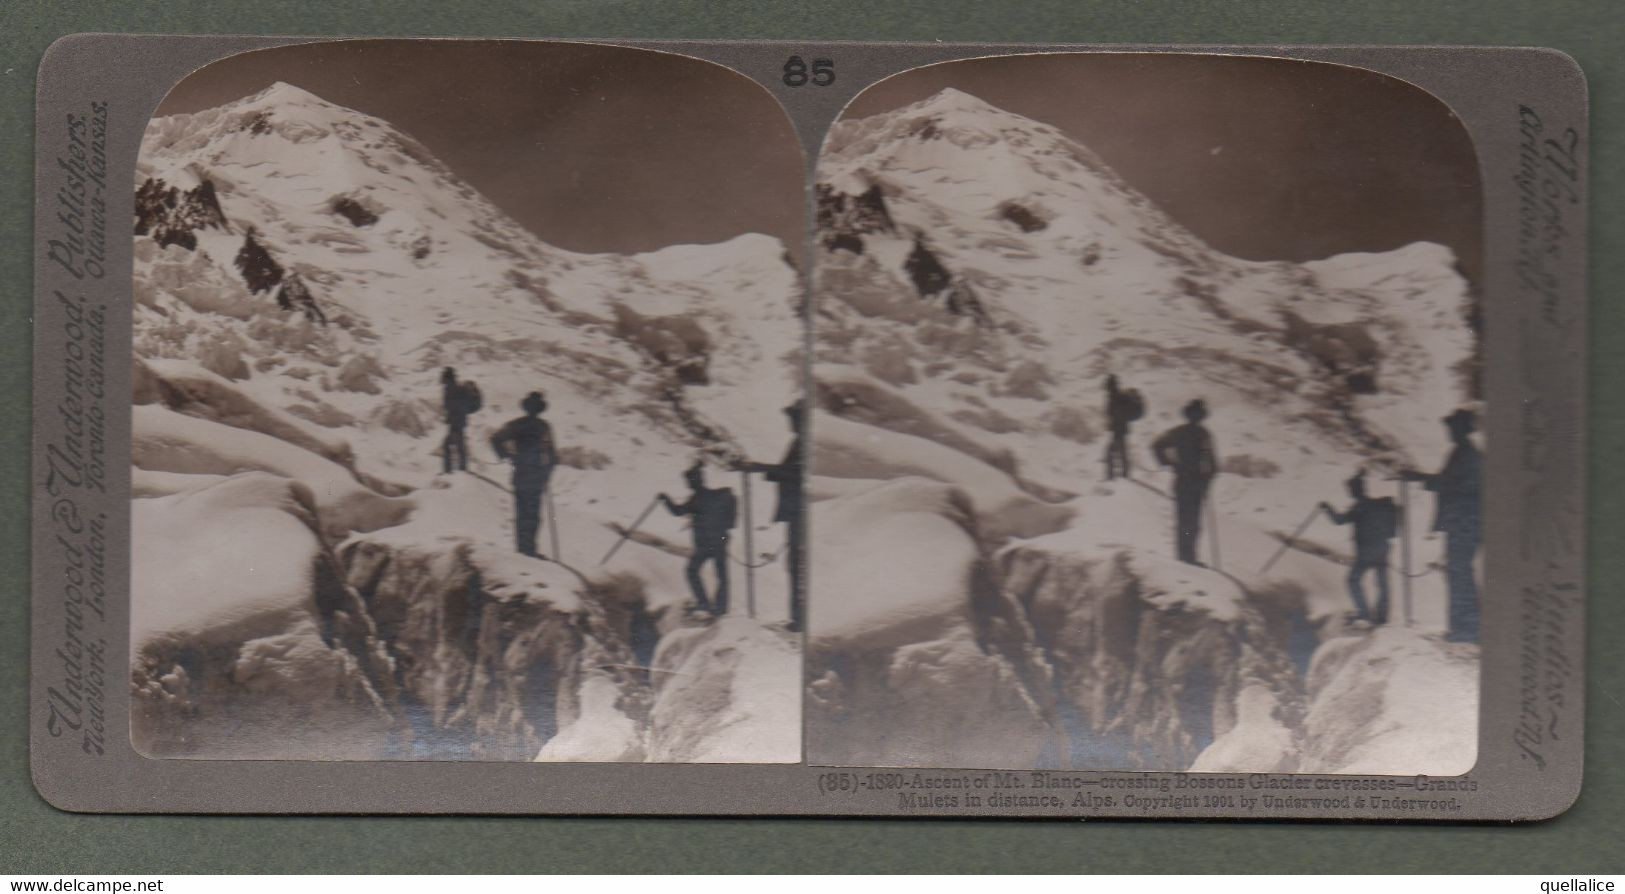 02153 "1820-ASCENT OF MT. BLANC-CROSSING BOSSONS GLACIER CREVASSES -GRANDS-MULETS IN DISTANCE-1901" STEREOSCOPICA ORIG. - Stereoscope Cards